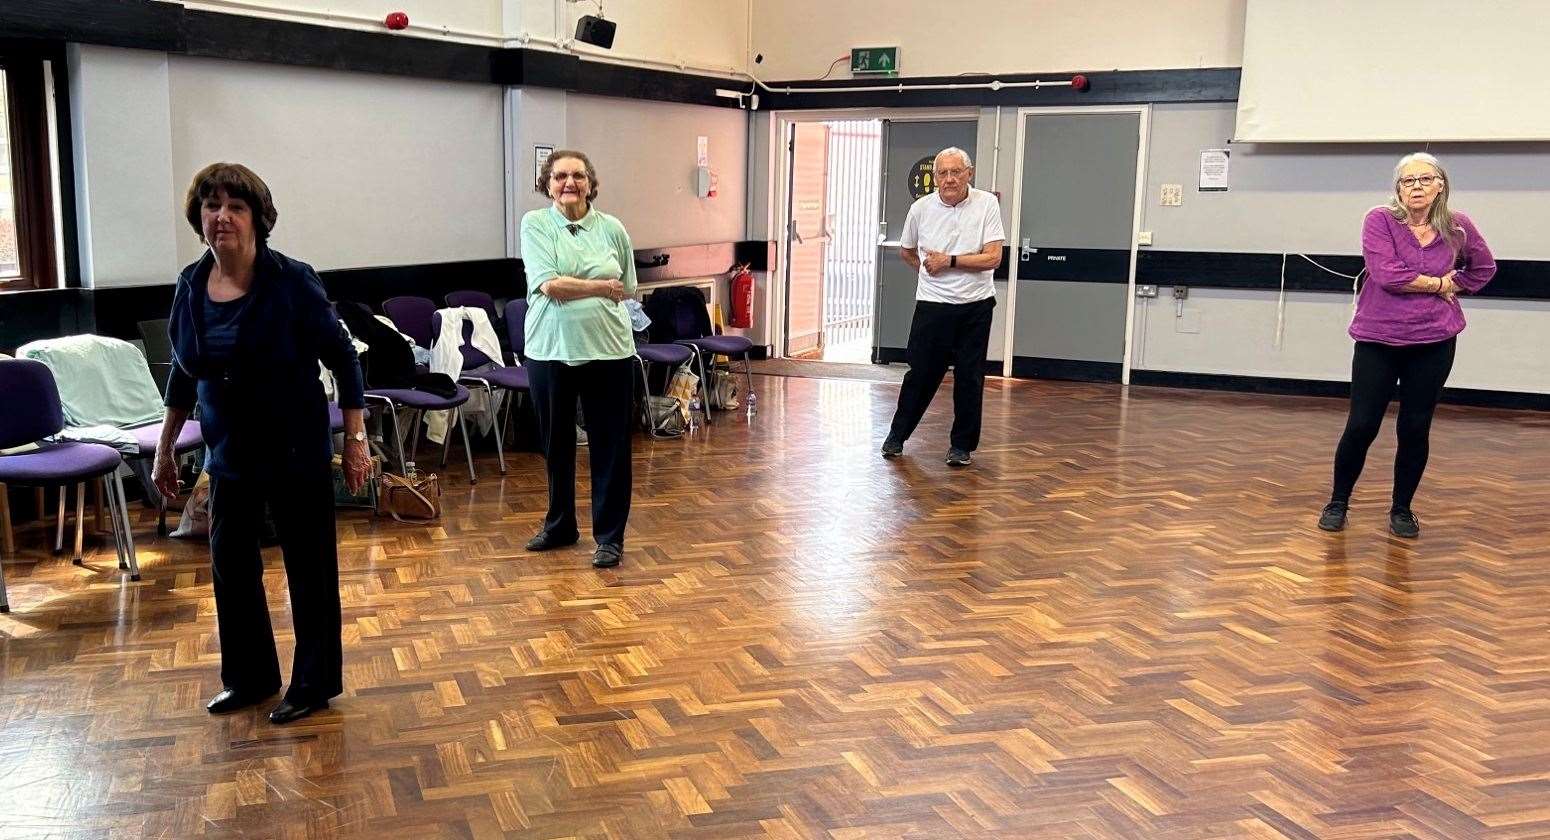 June Blackburn, second from left, still tap dancing away at the age of 90